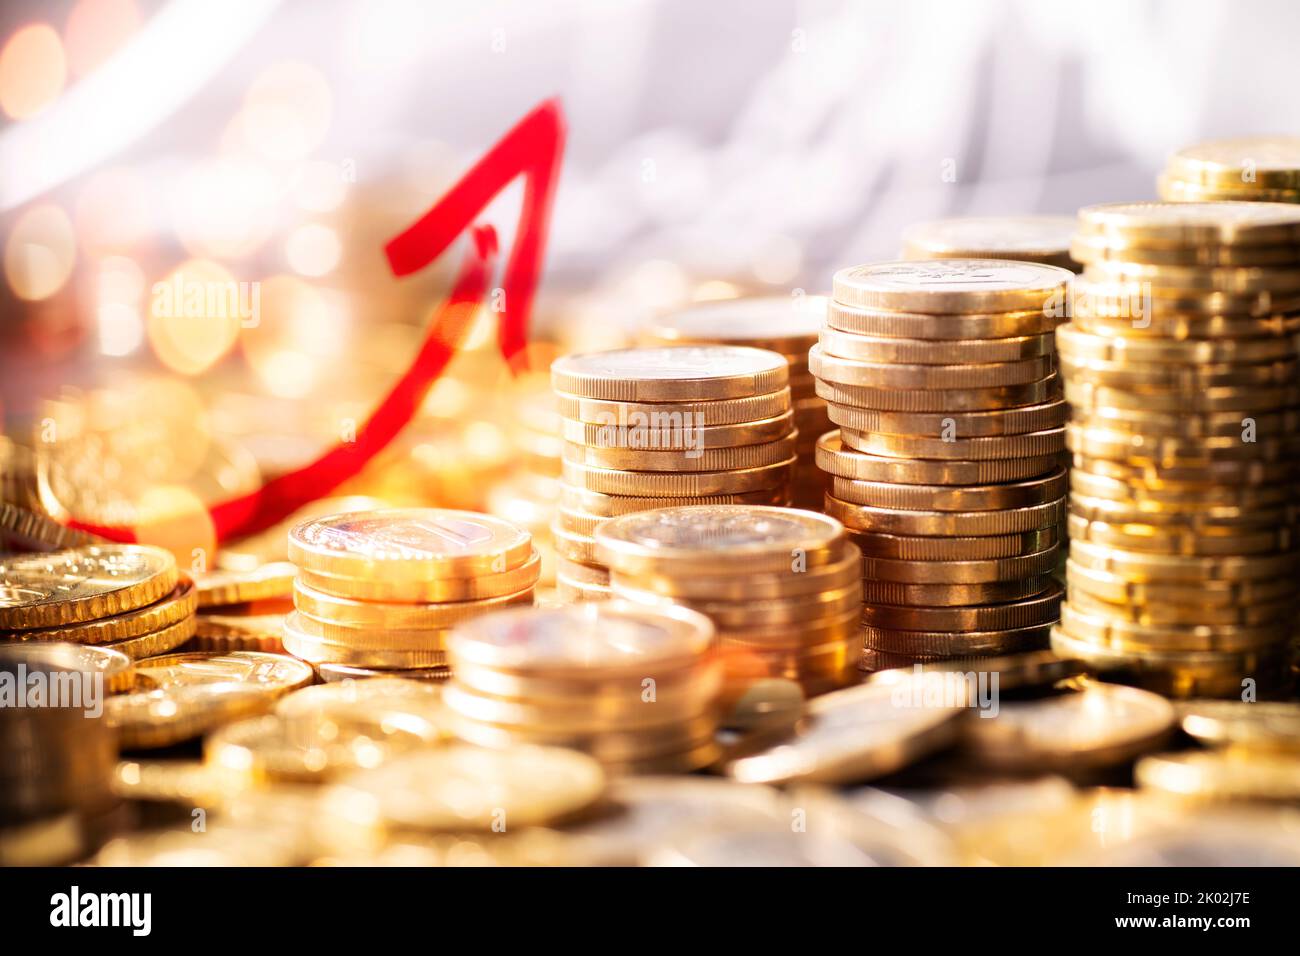 Stack of coins in front of an upward curve symbolizing a growth of wealth Stock Photo